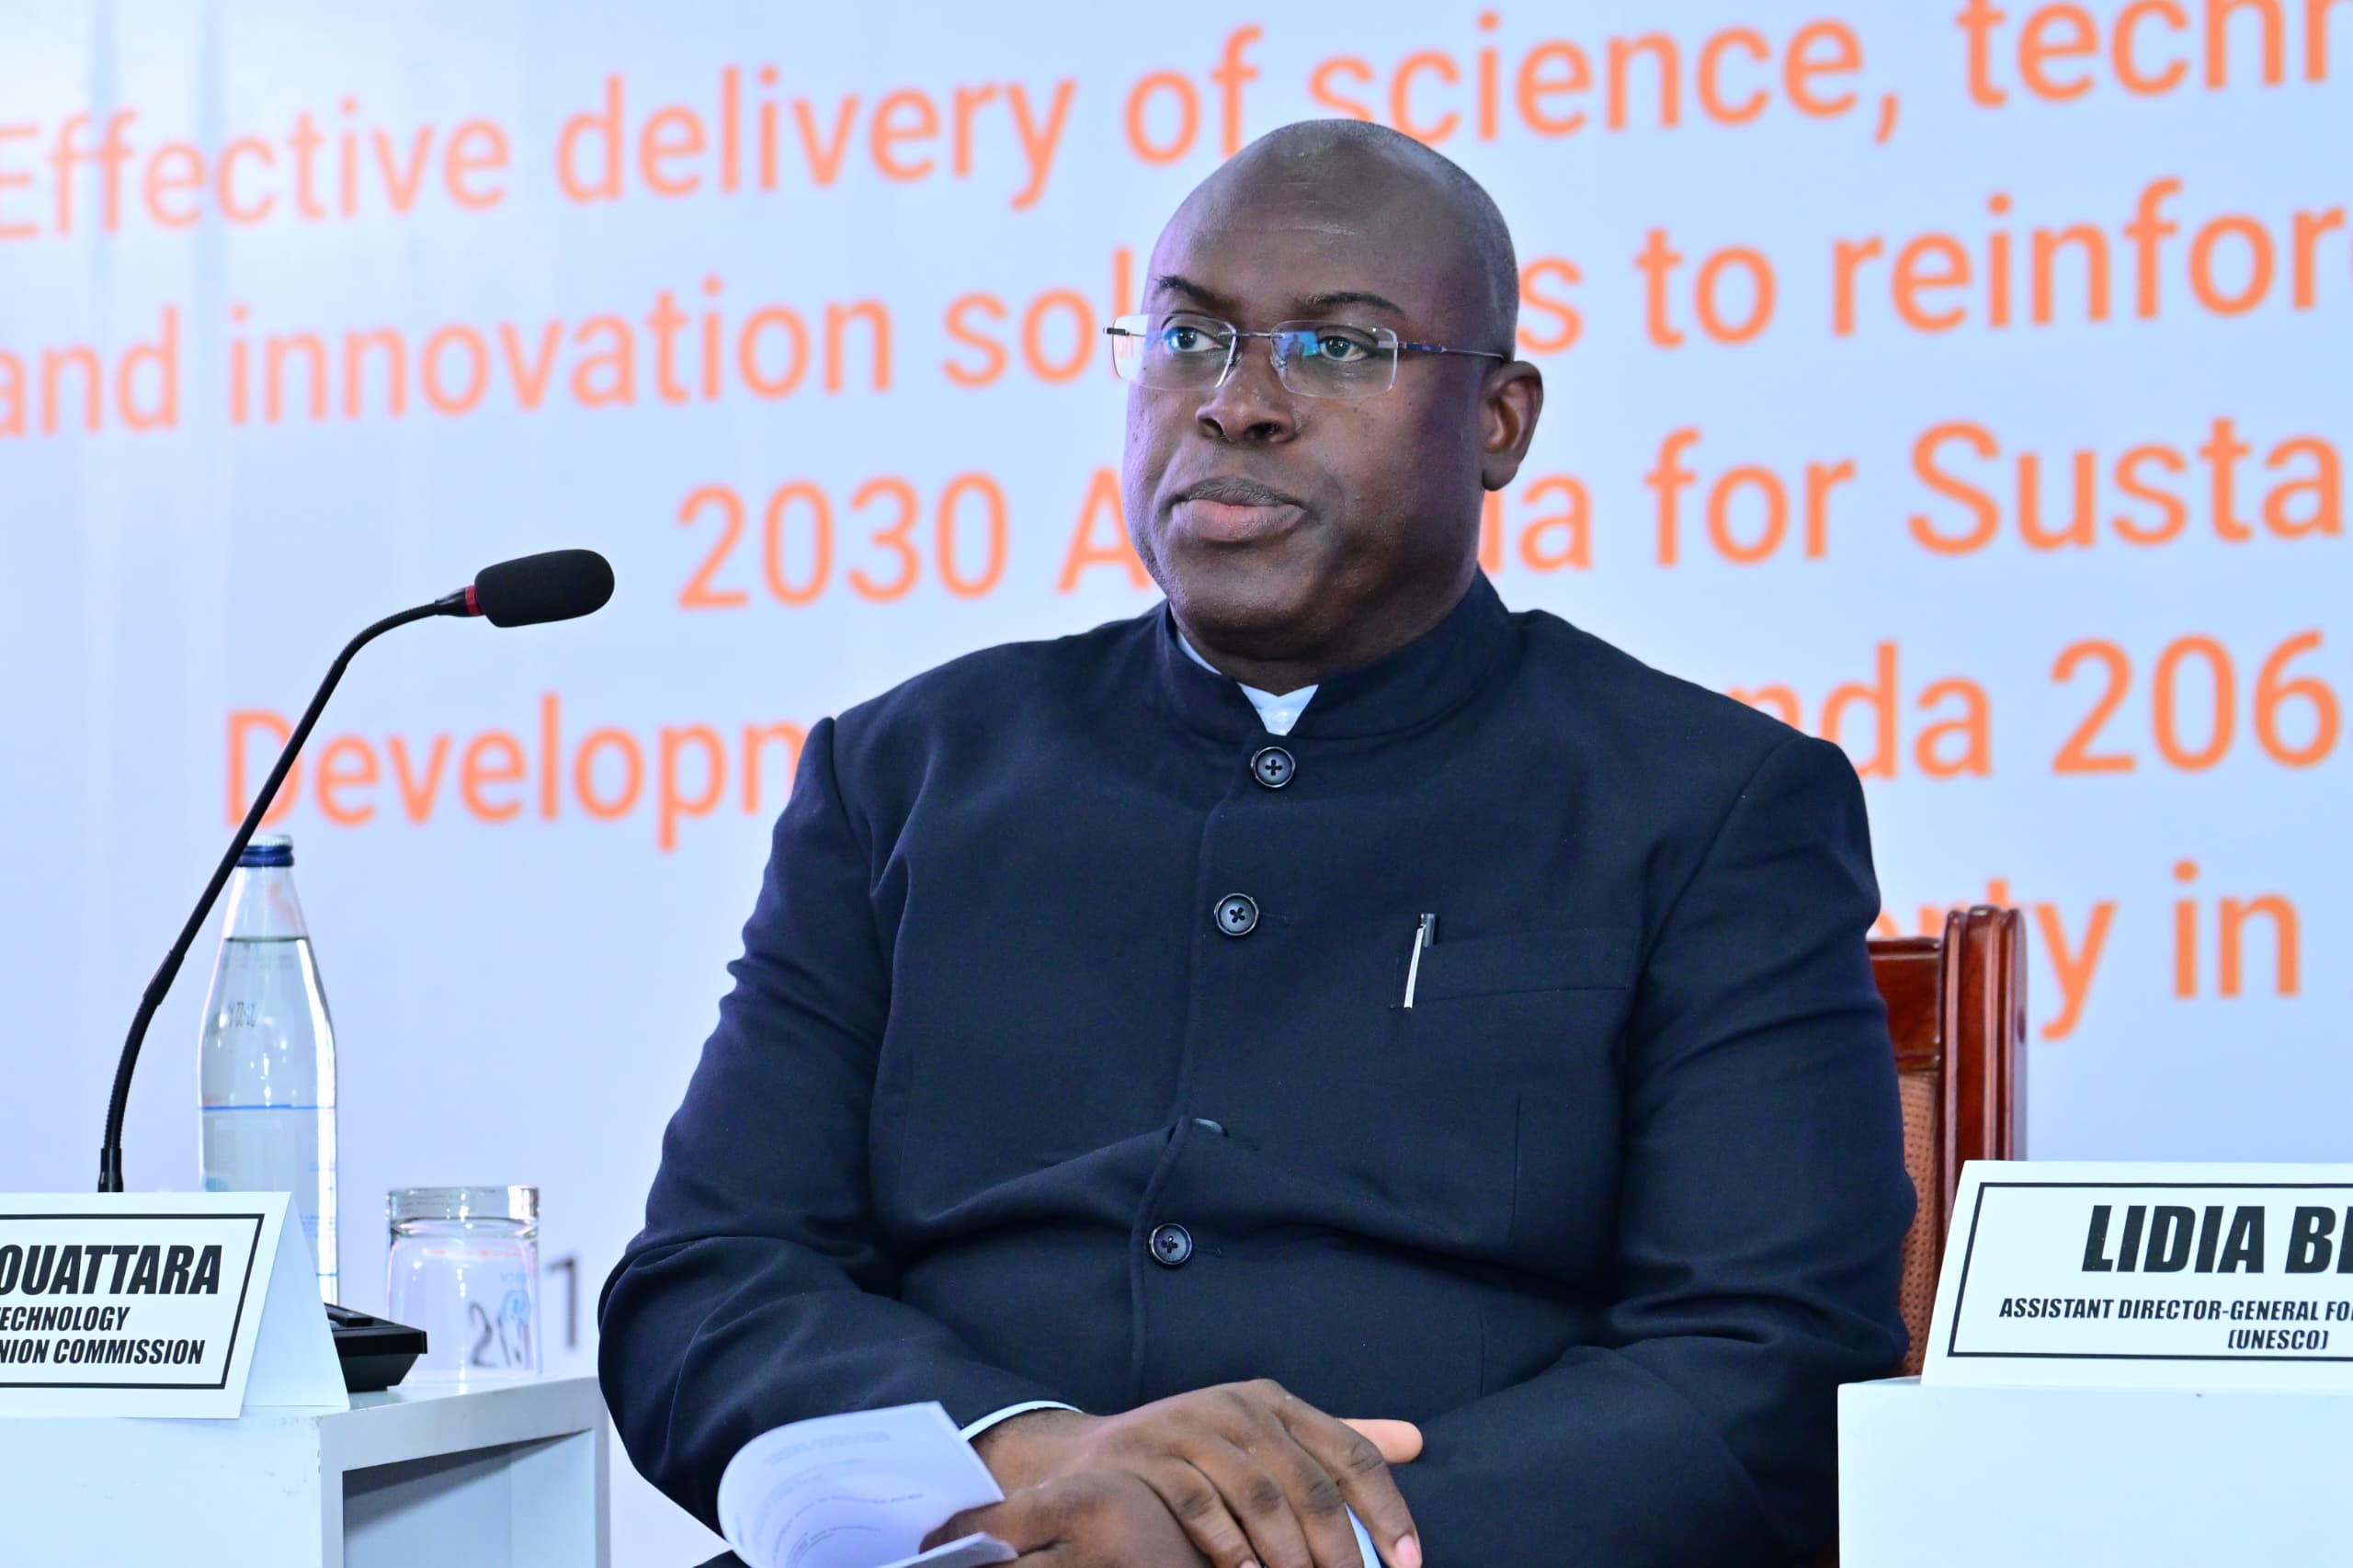 6th African Science, Technology, and Innovation Forum - Day 2 in pictures